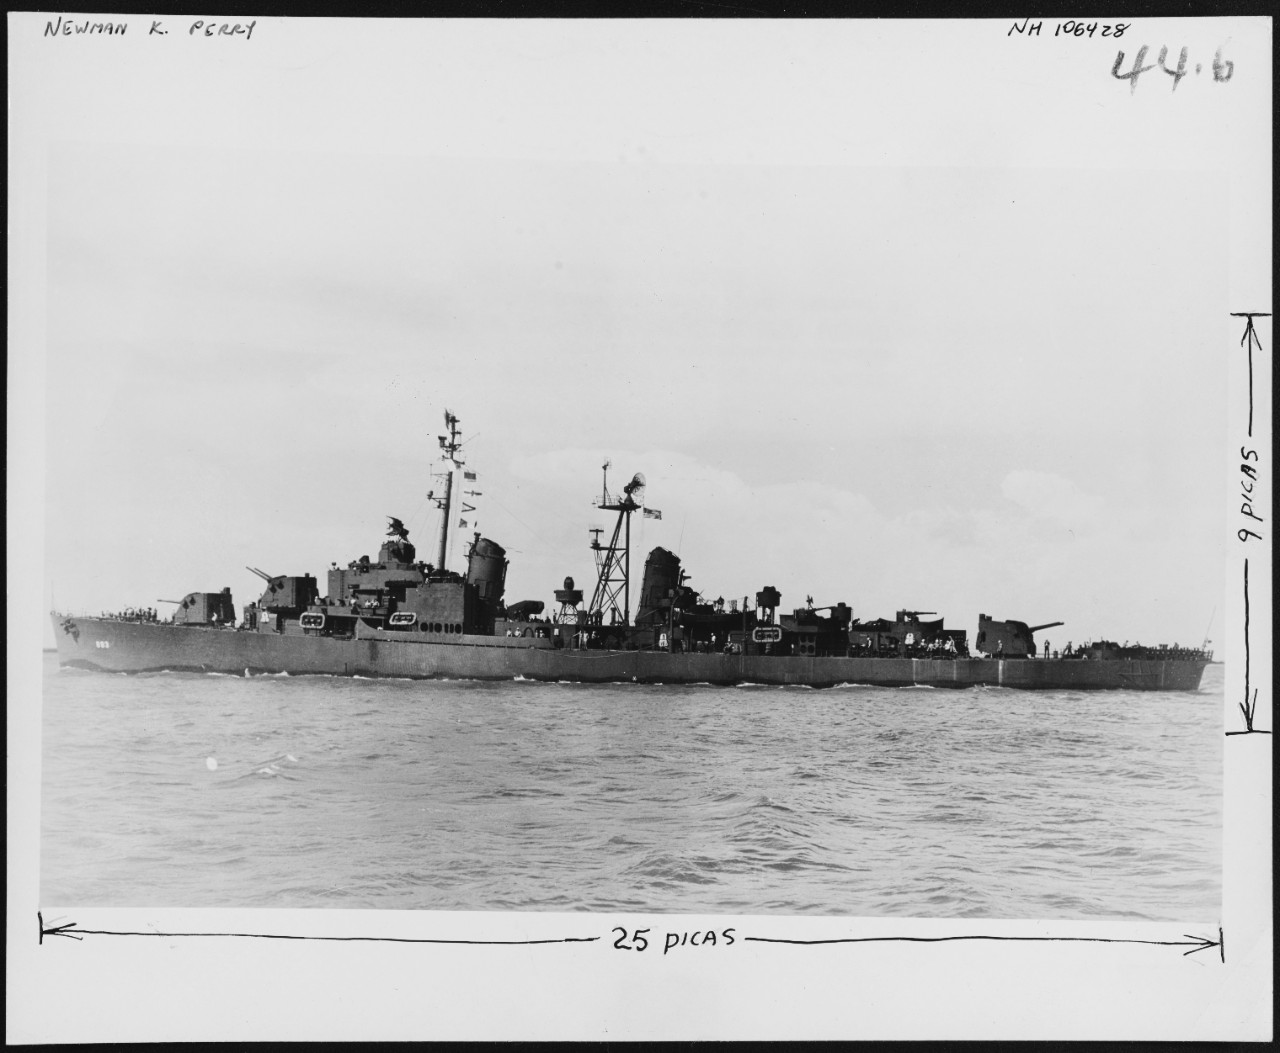 Photo #: NH 106428  USS Newman K. Perry